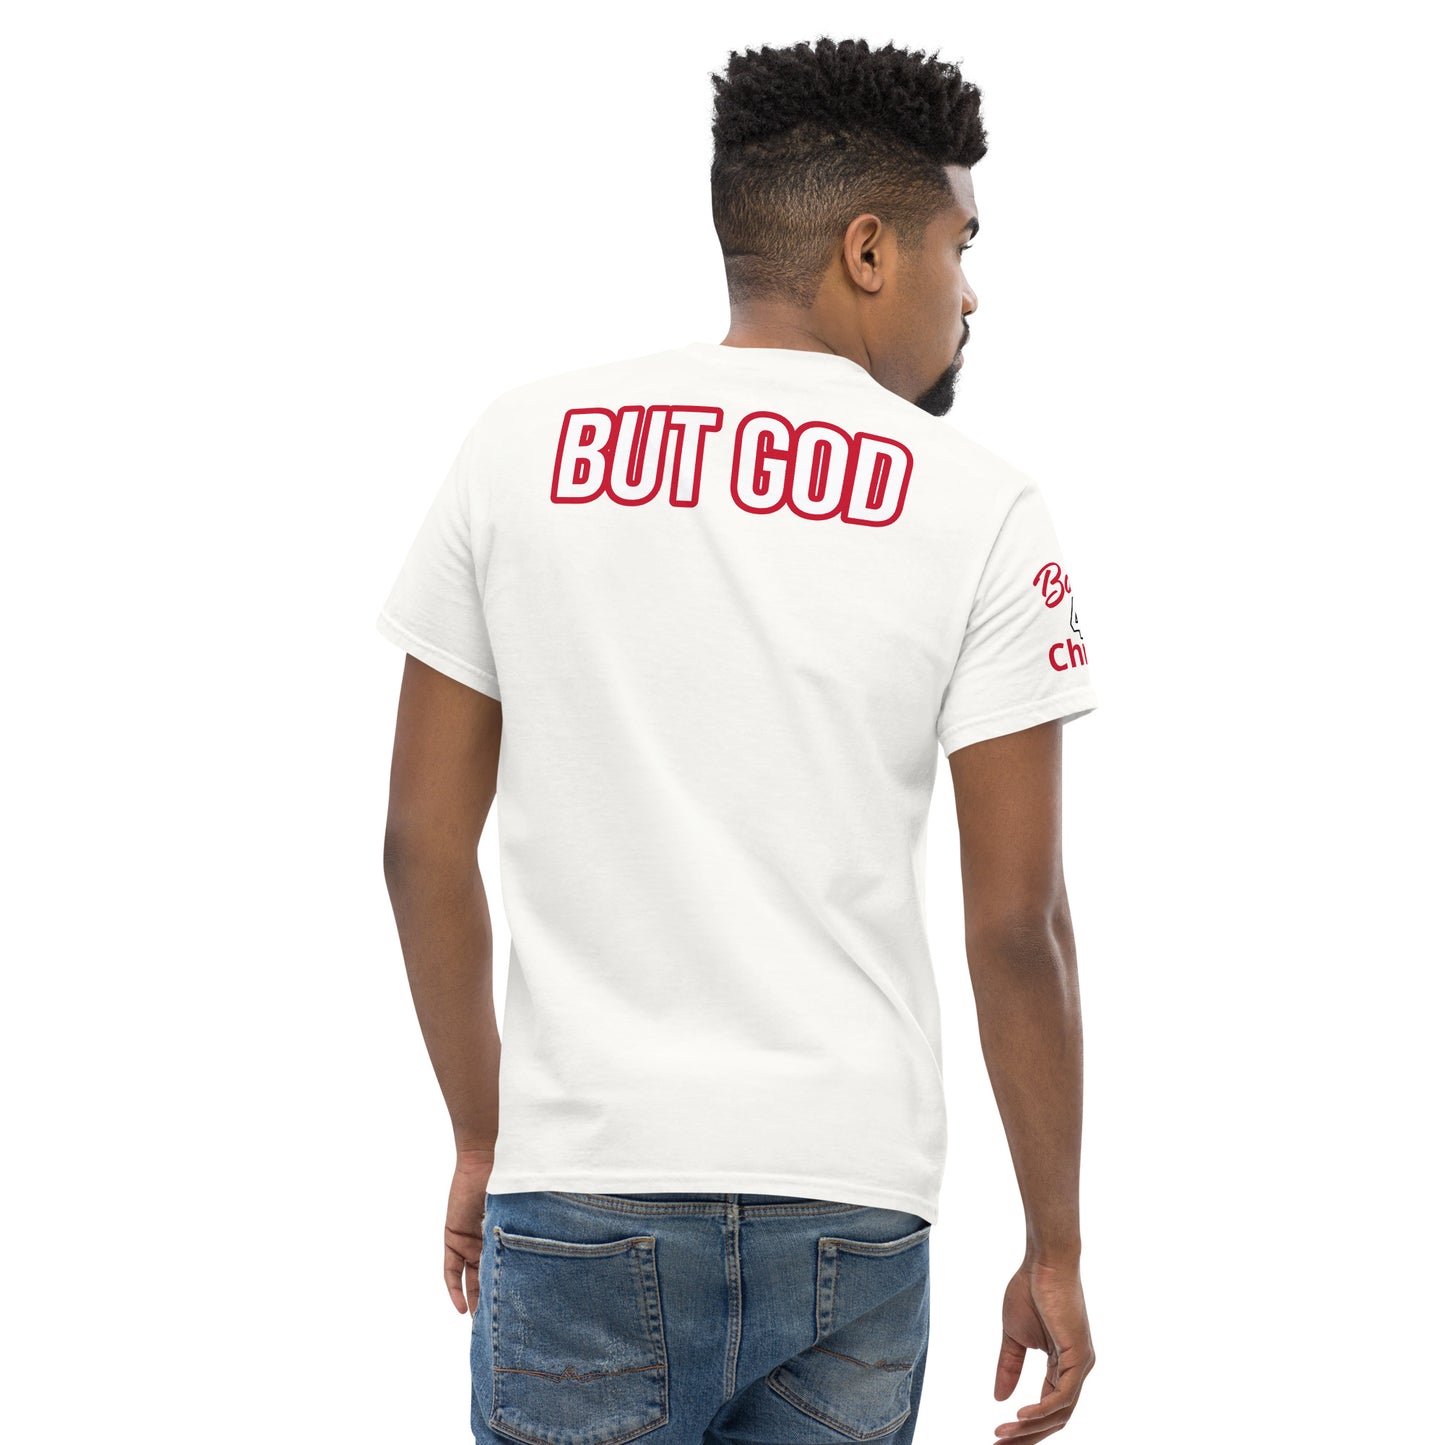 Oops Tee w back/sleeve design (Enter your sin)